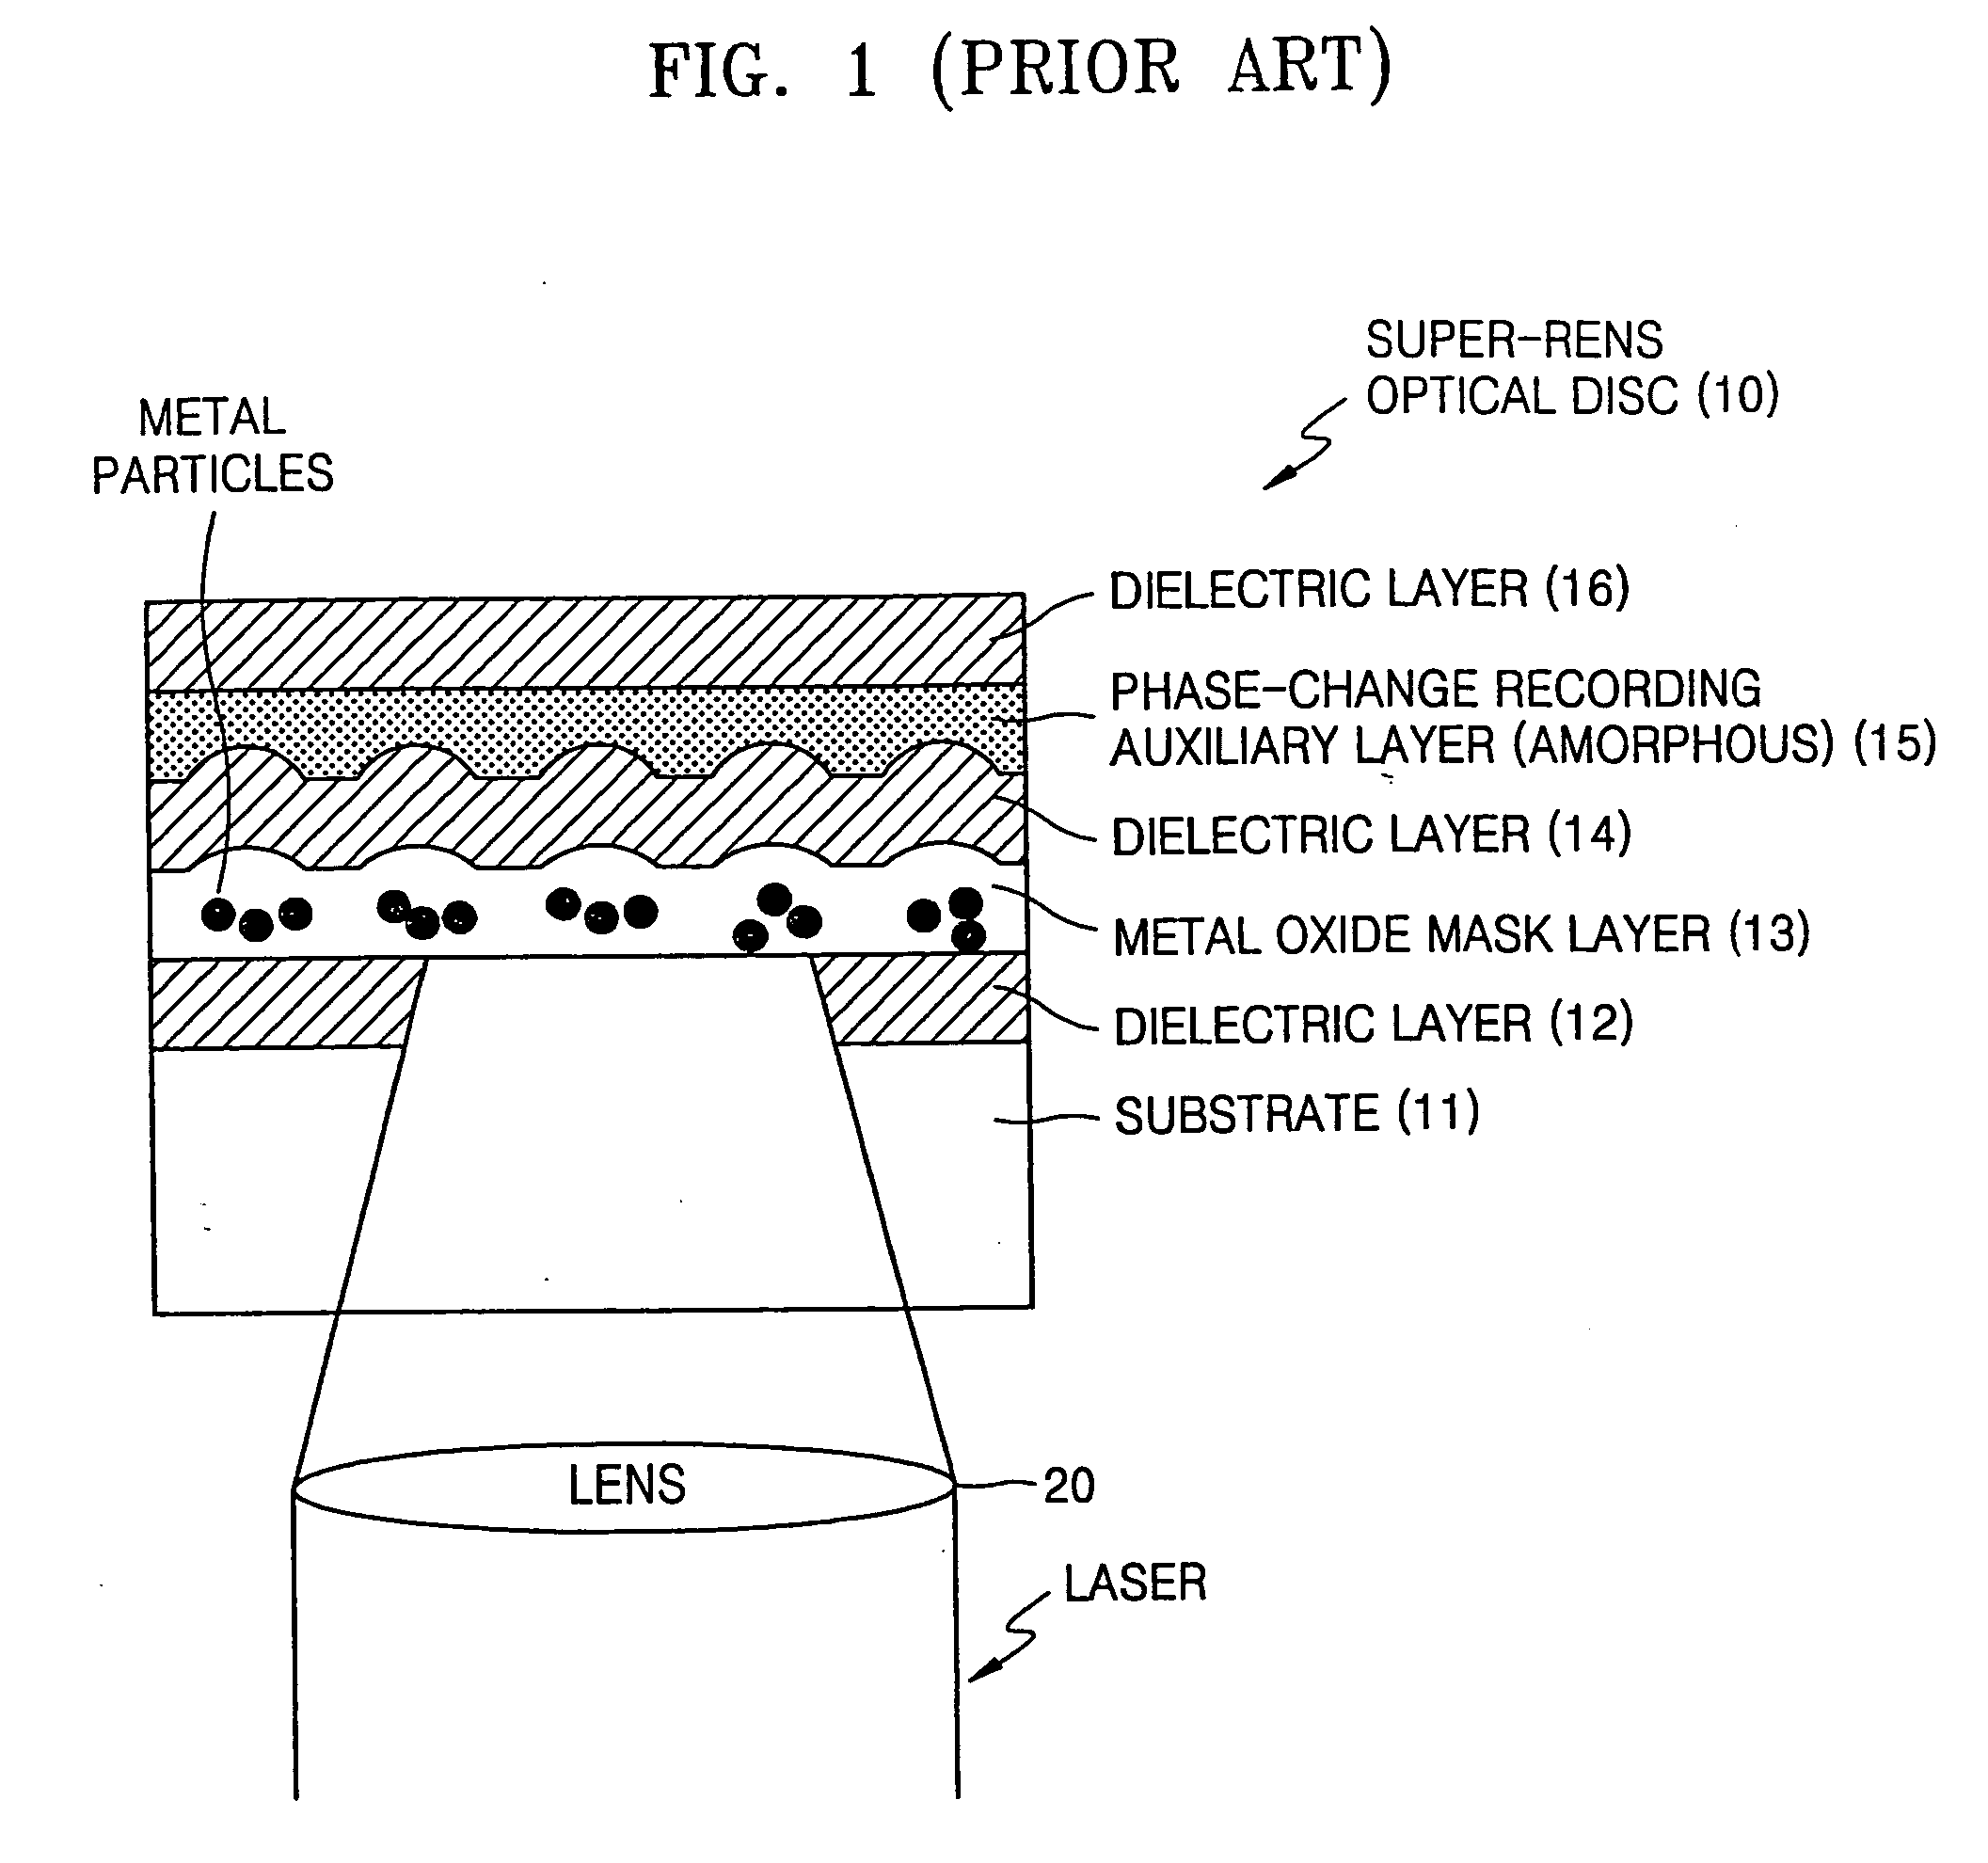 Optical disc with super-resolution near-field structure